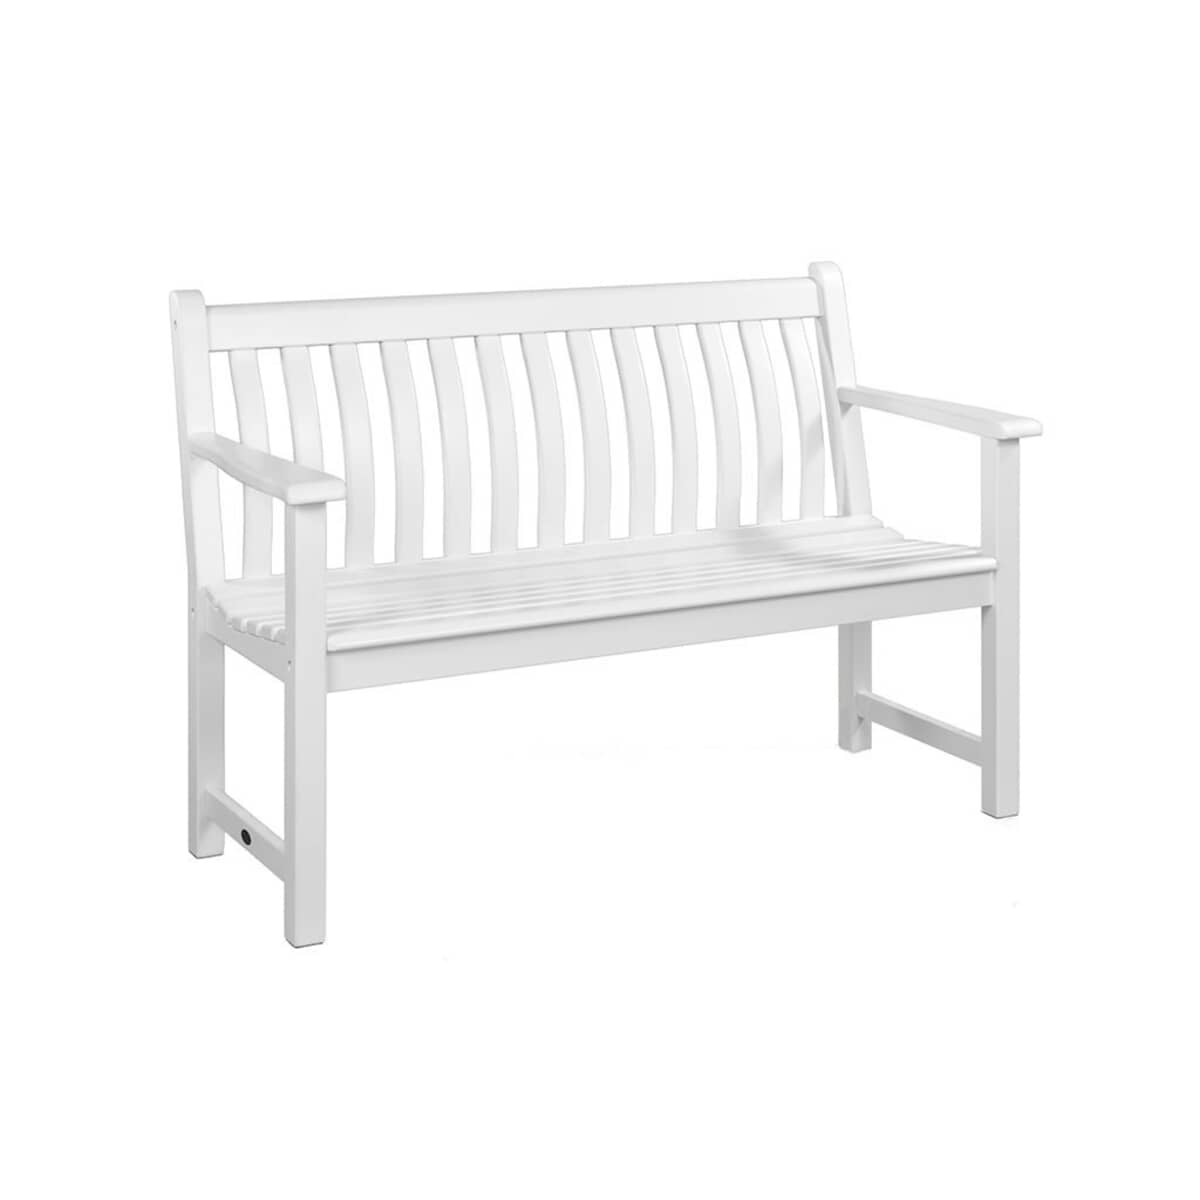 Alexander Rose Broadfield White Acacia  Bench 4ft